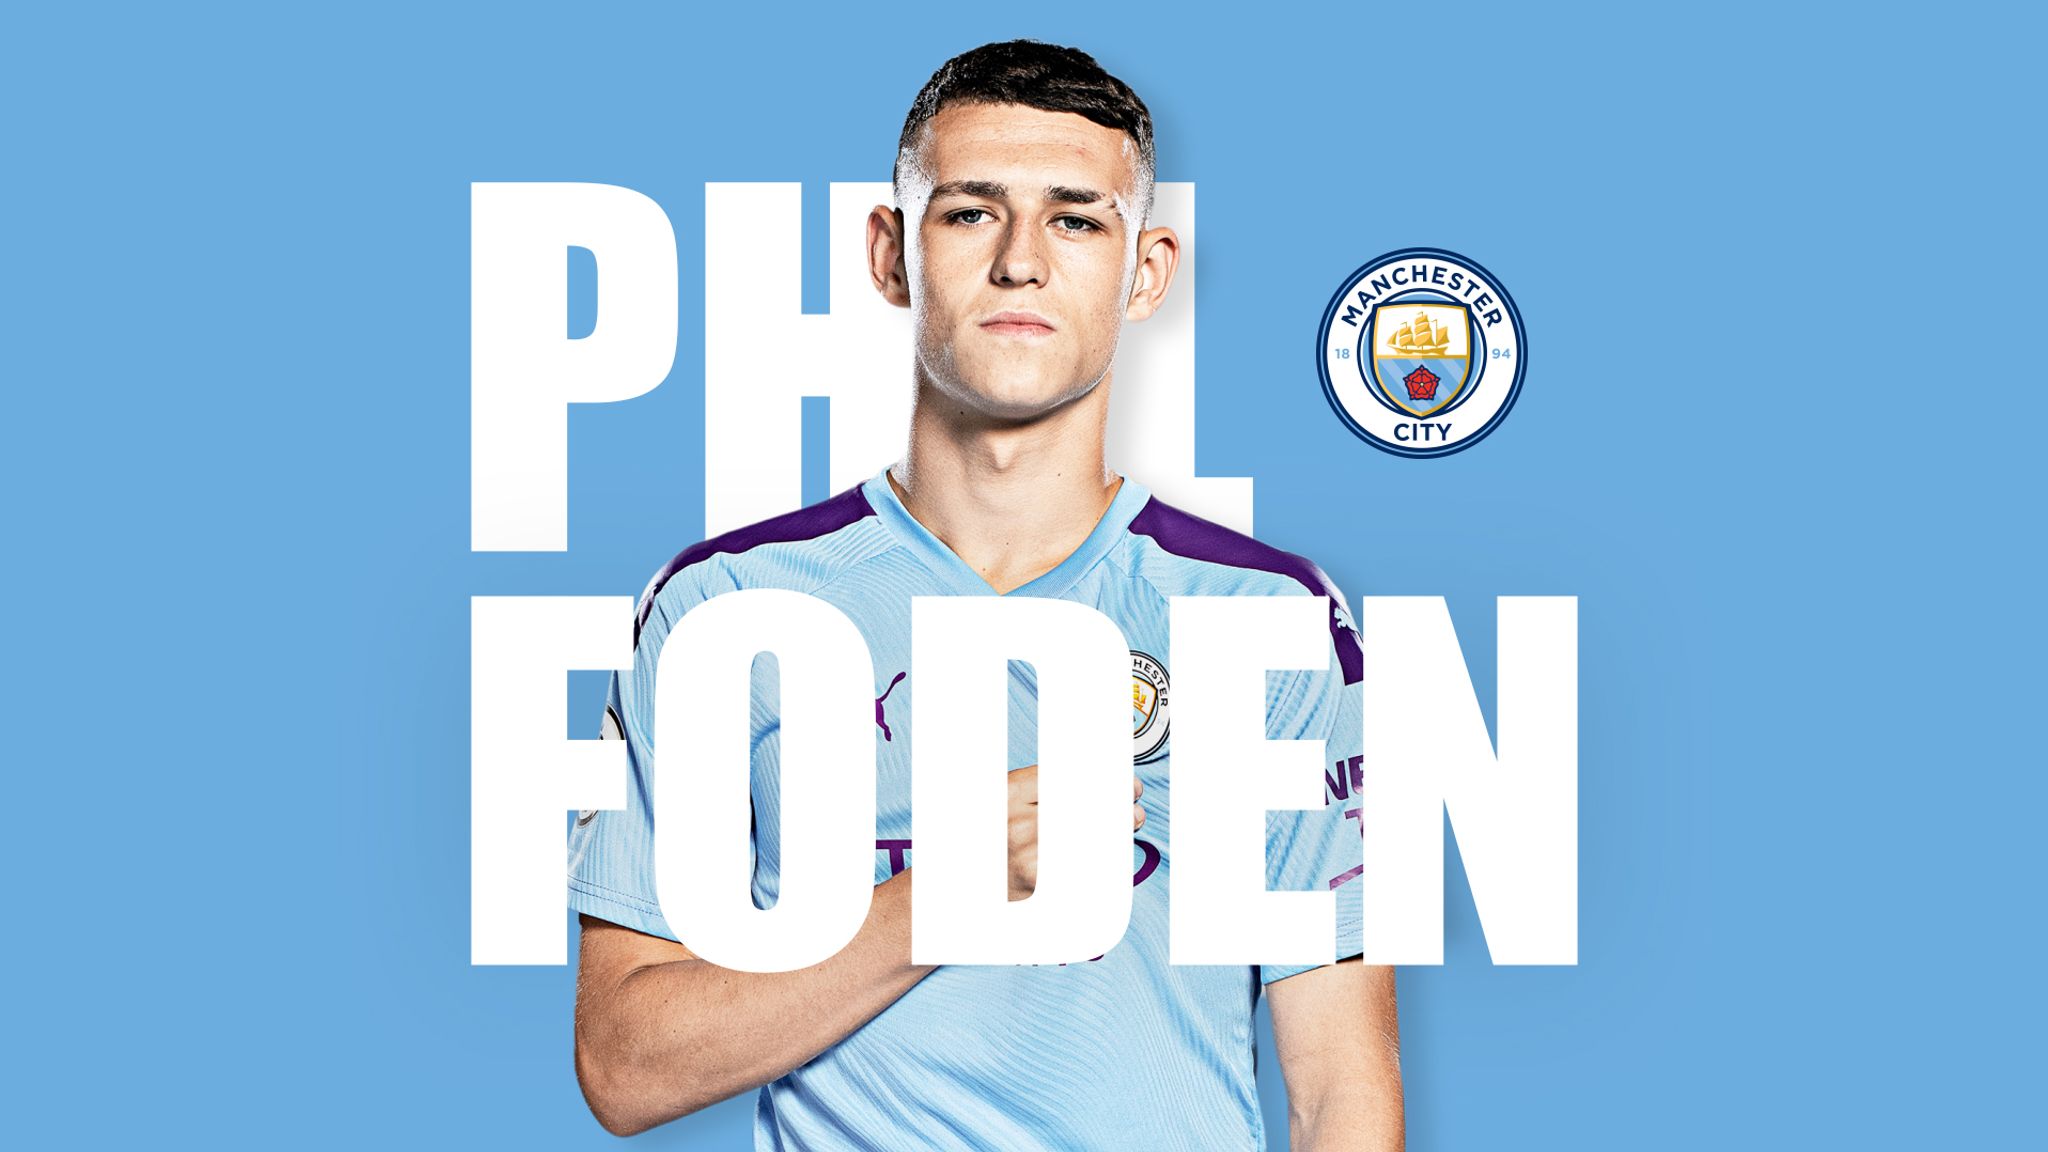 Phil Foden practices dribbling for agility enhancement